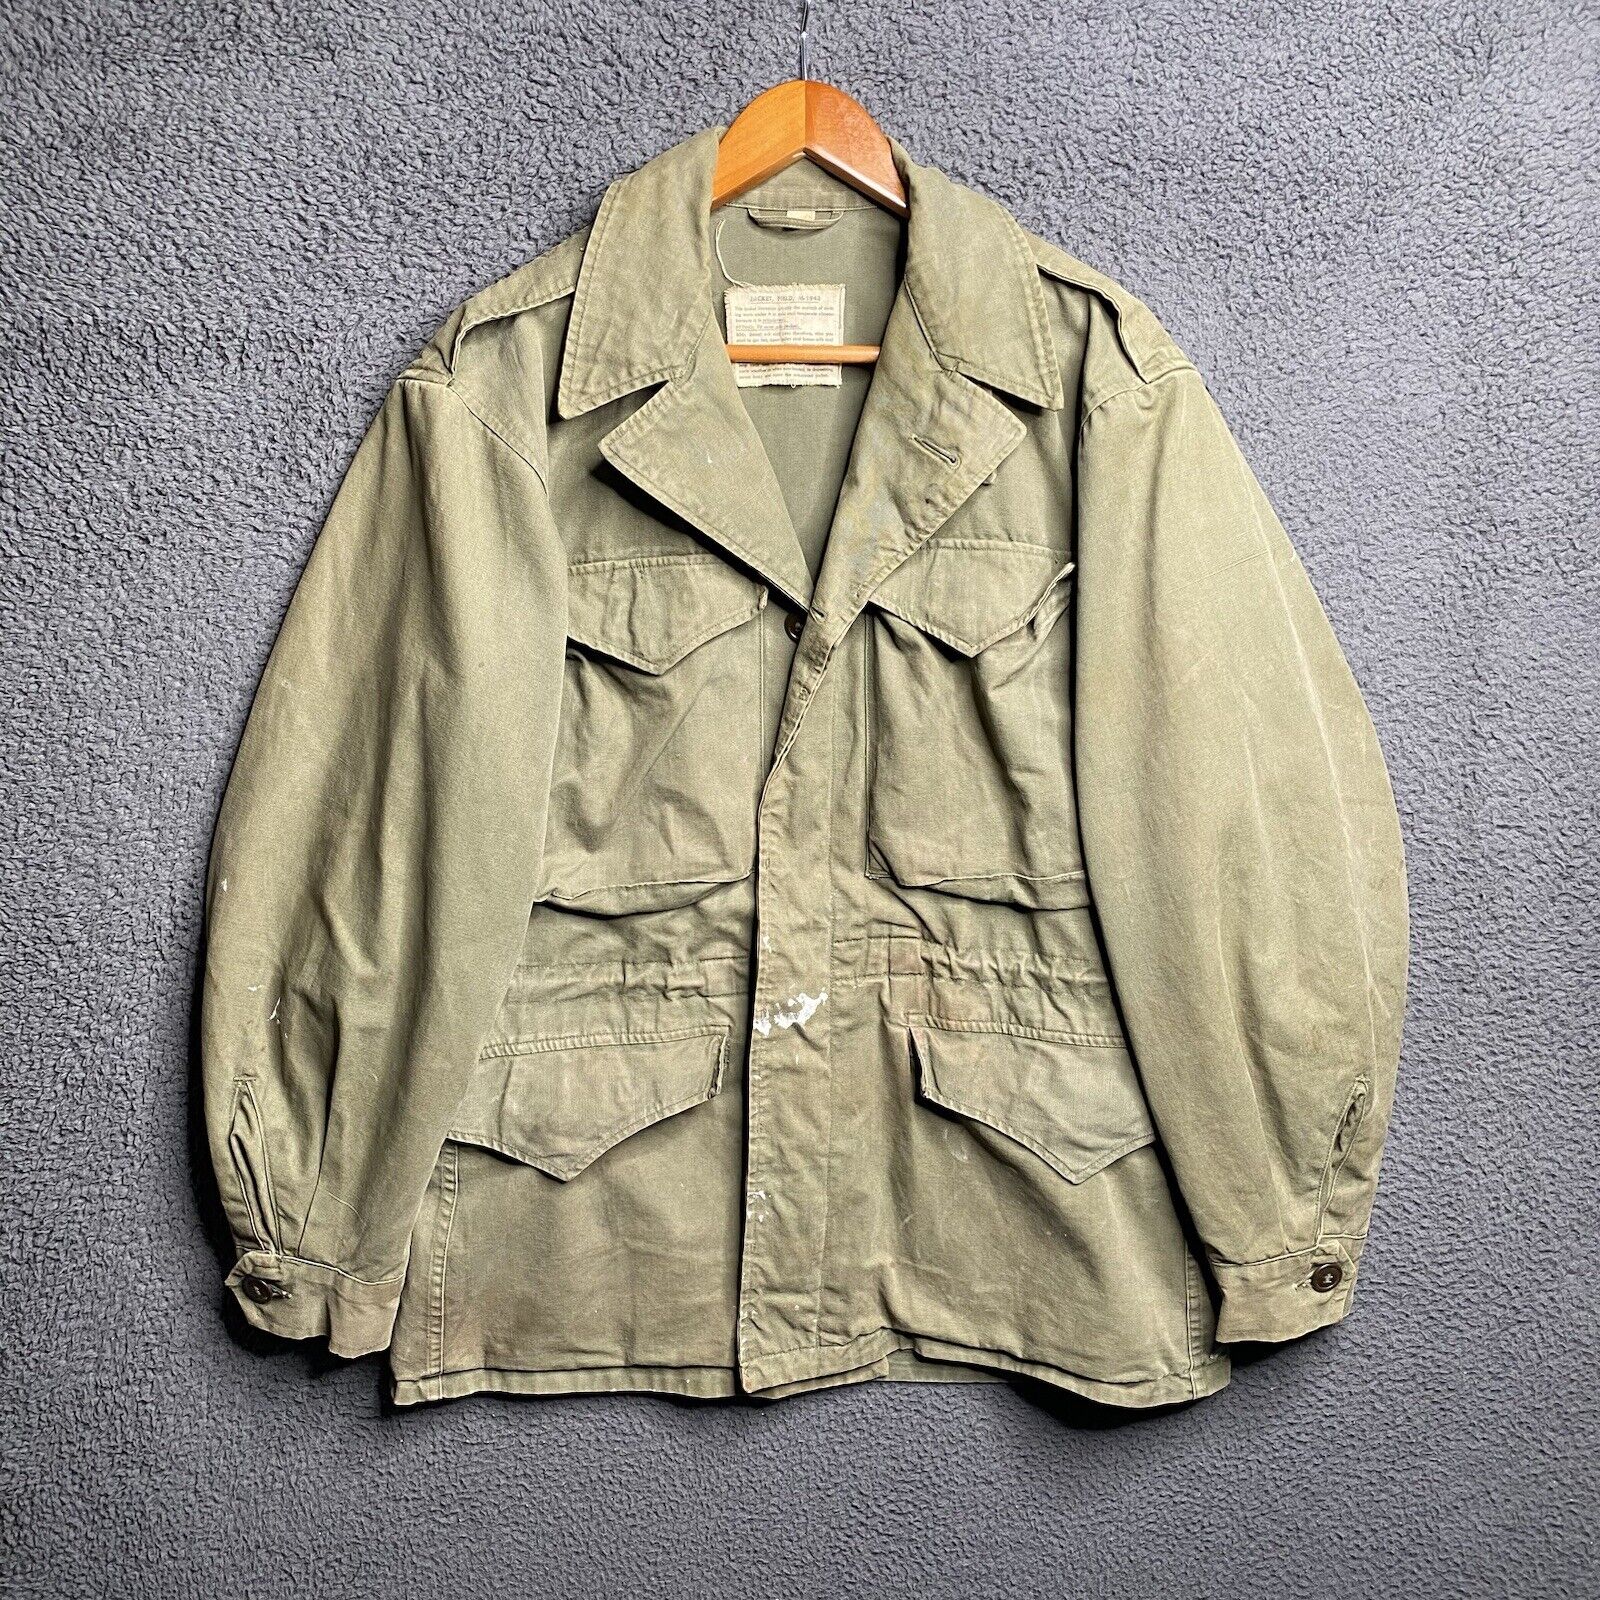 Vintage 40s WW2 M-1943 M43 Field Jacket Coat Men\'s Small 34R US Army Military